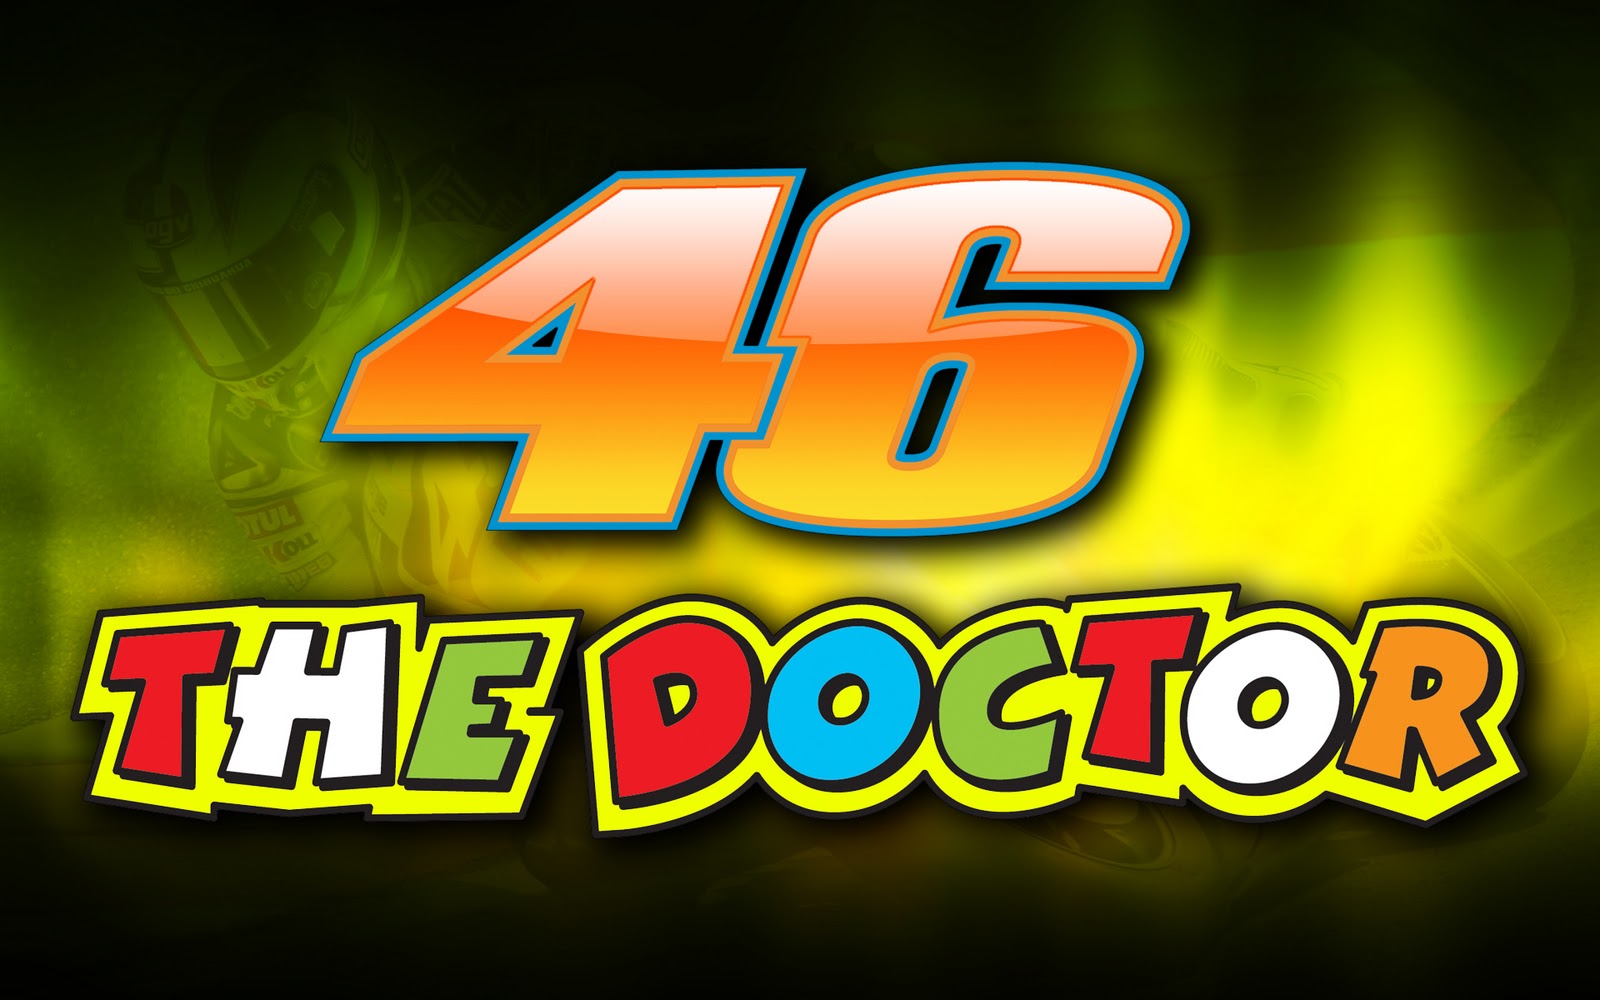 46 the doctor wallpaper,text,font,graphic design,logo,graphics